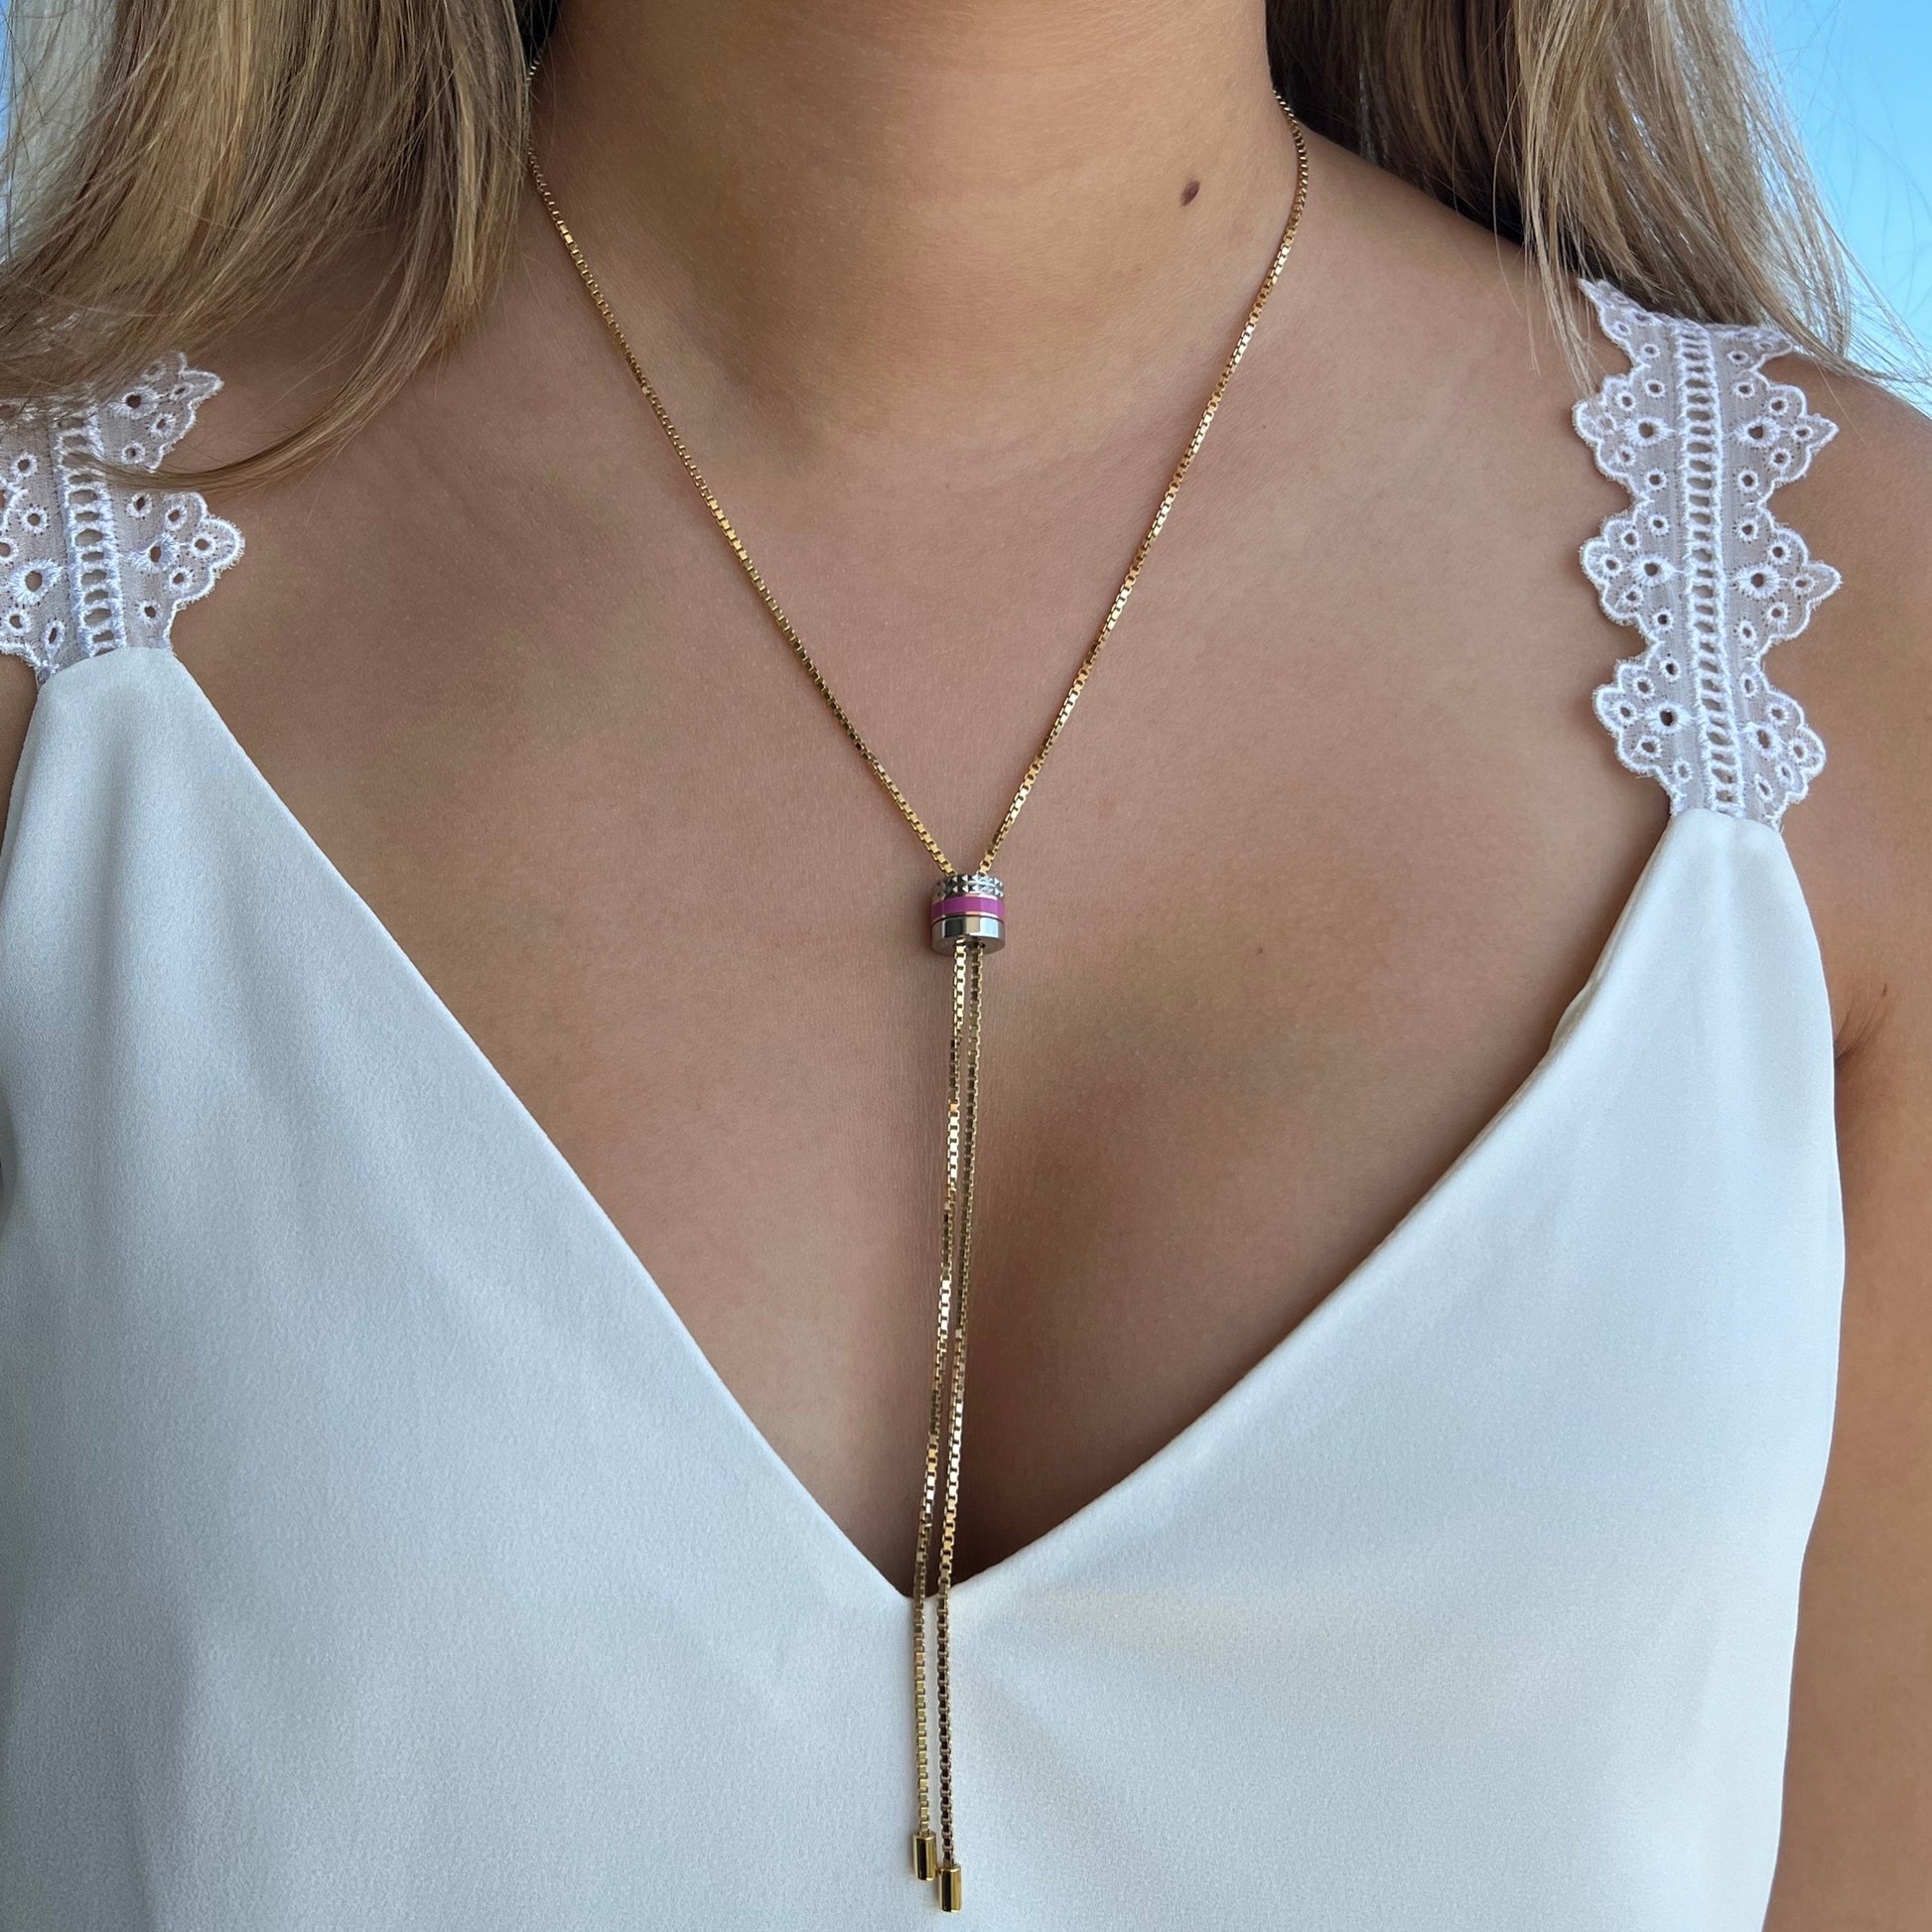 WEWA BOLO TIE TUBE ROSE VIOLET CHIP NECKLACE